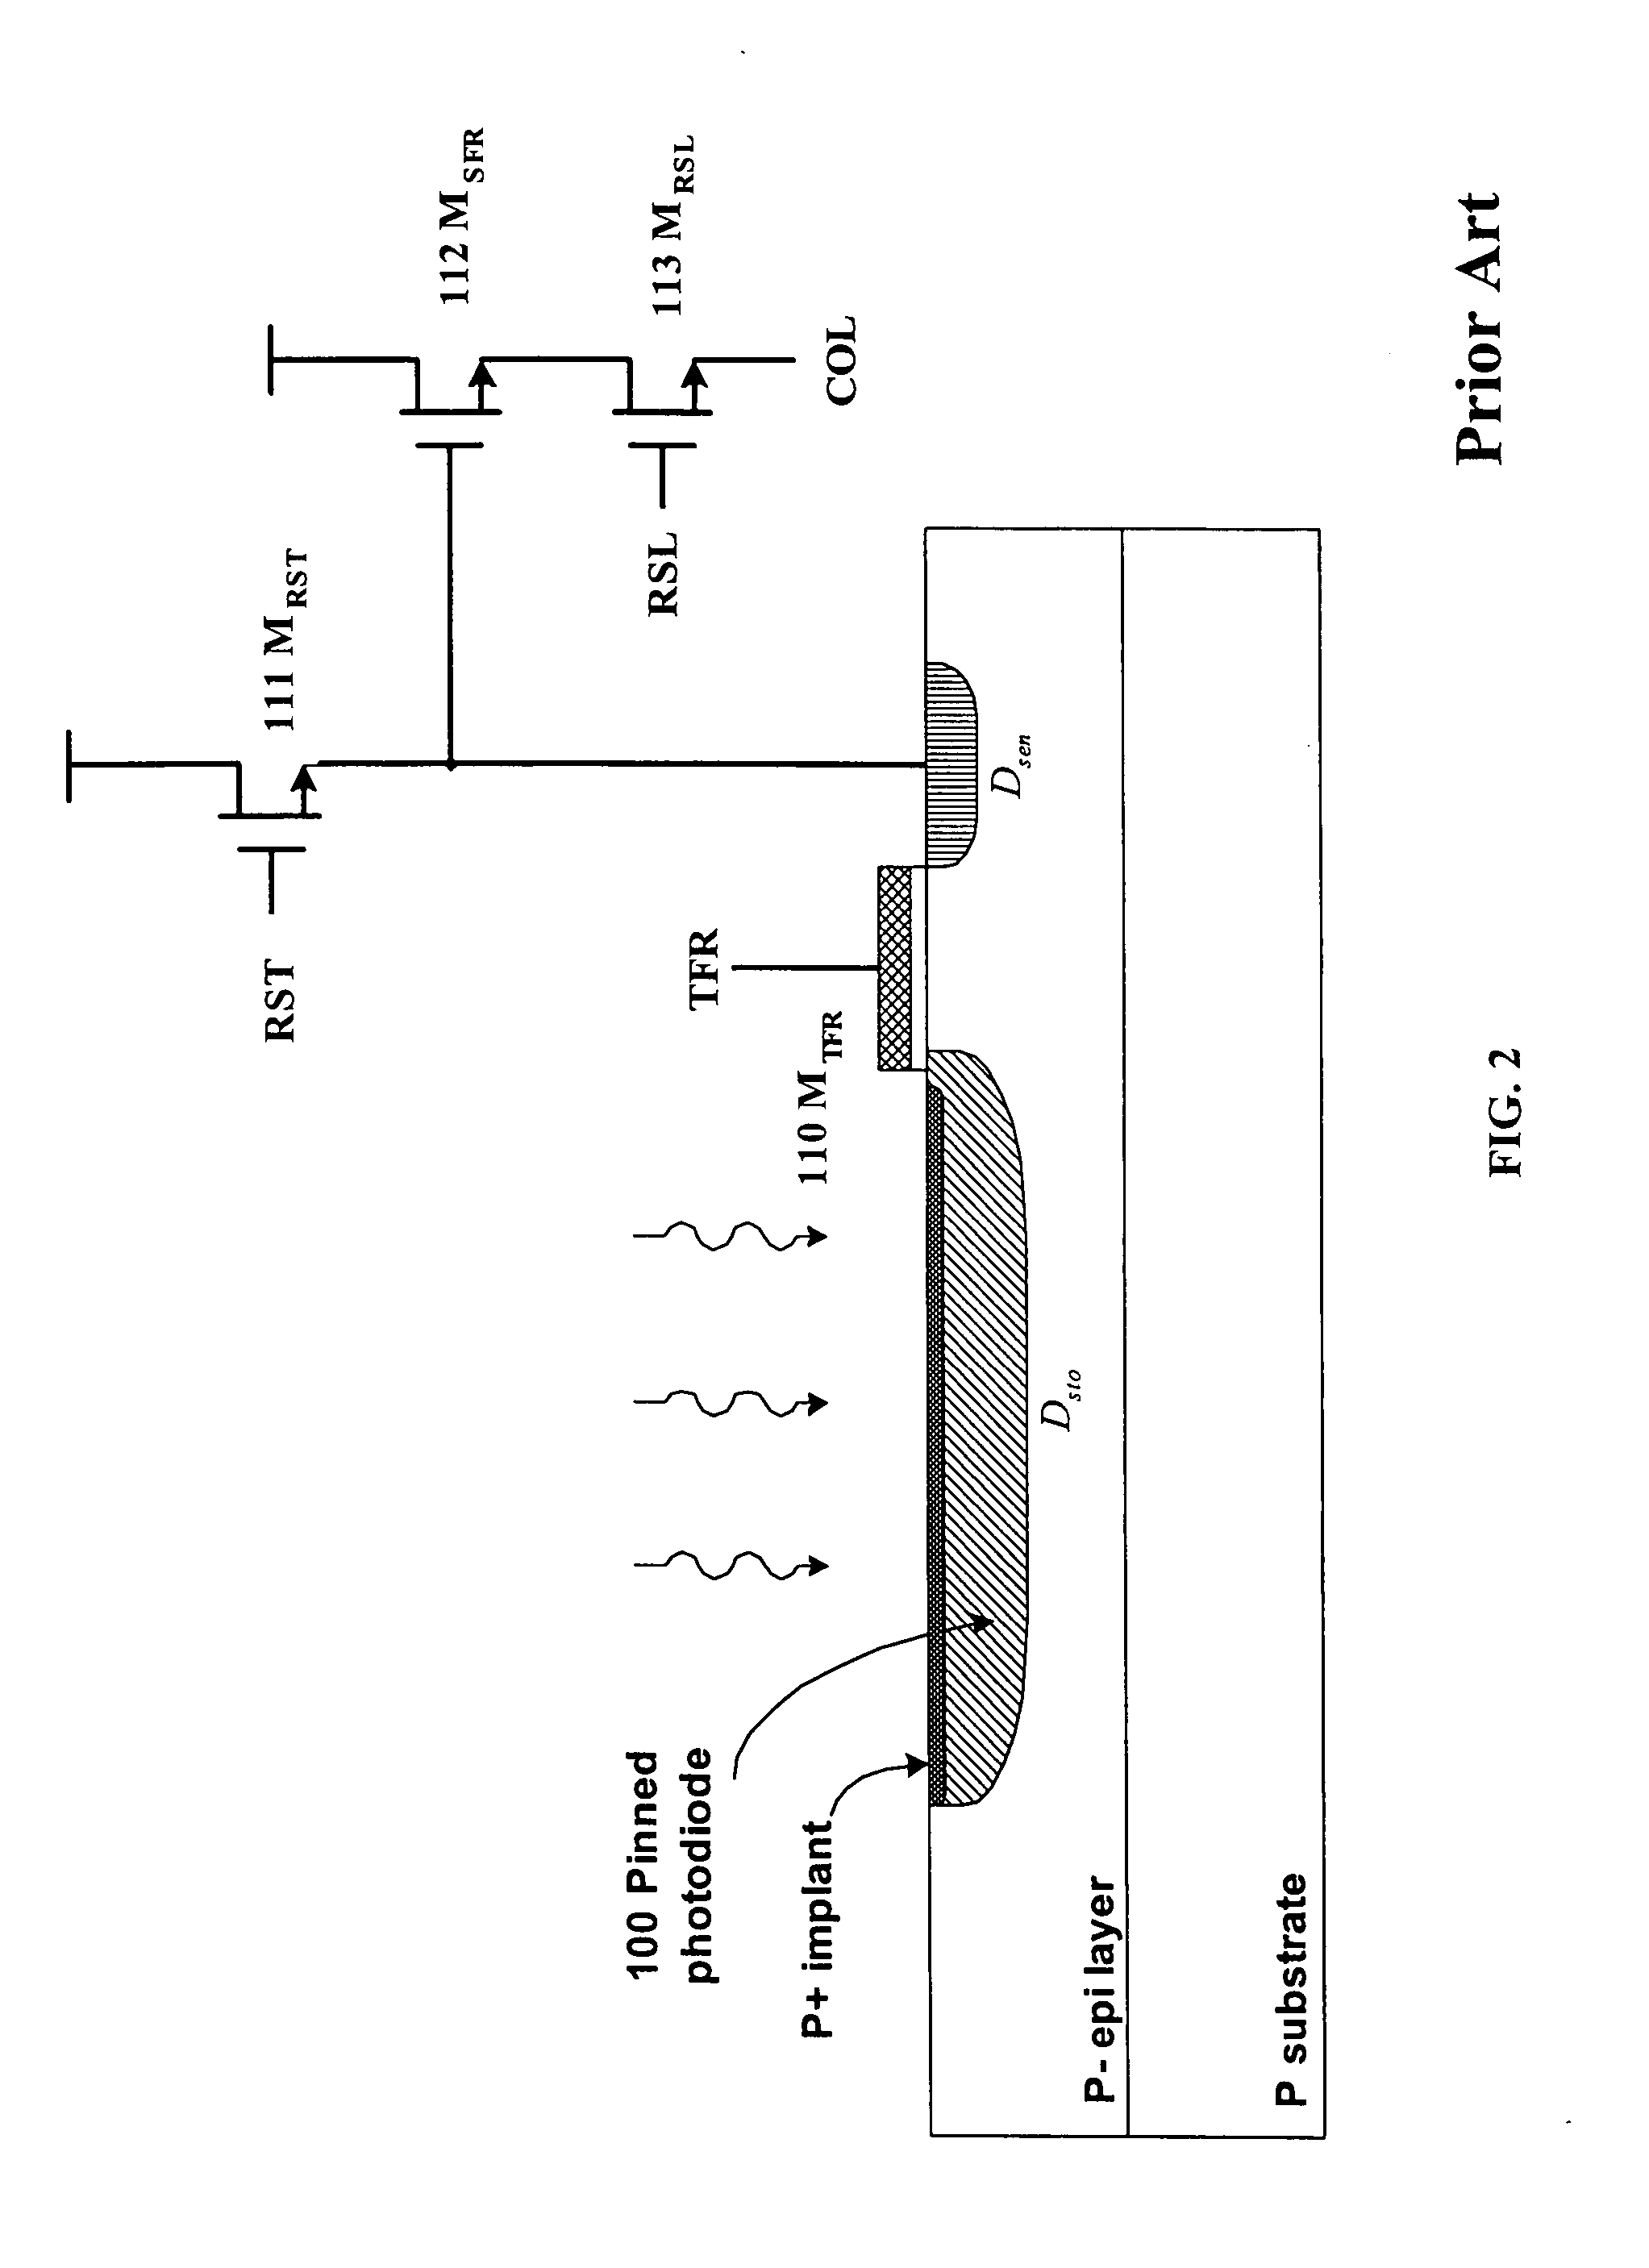 CDS capable sensor with photon sensing layer on active pixel circuit